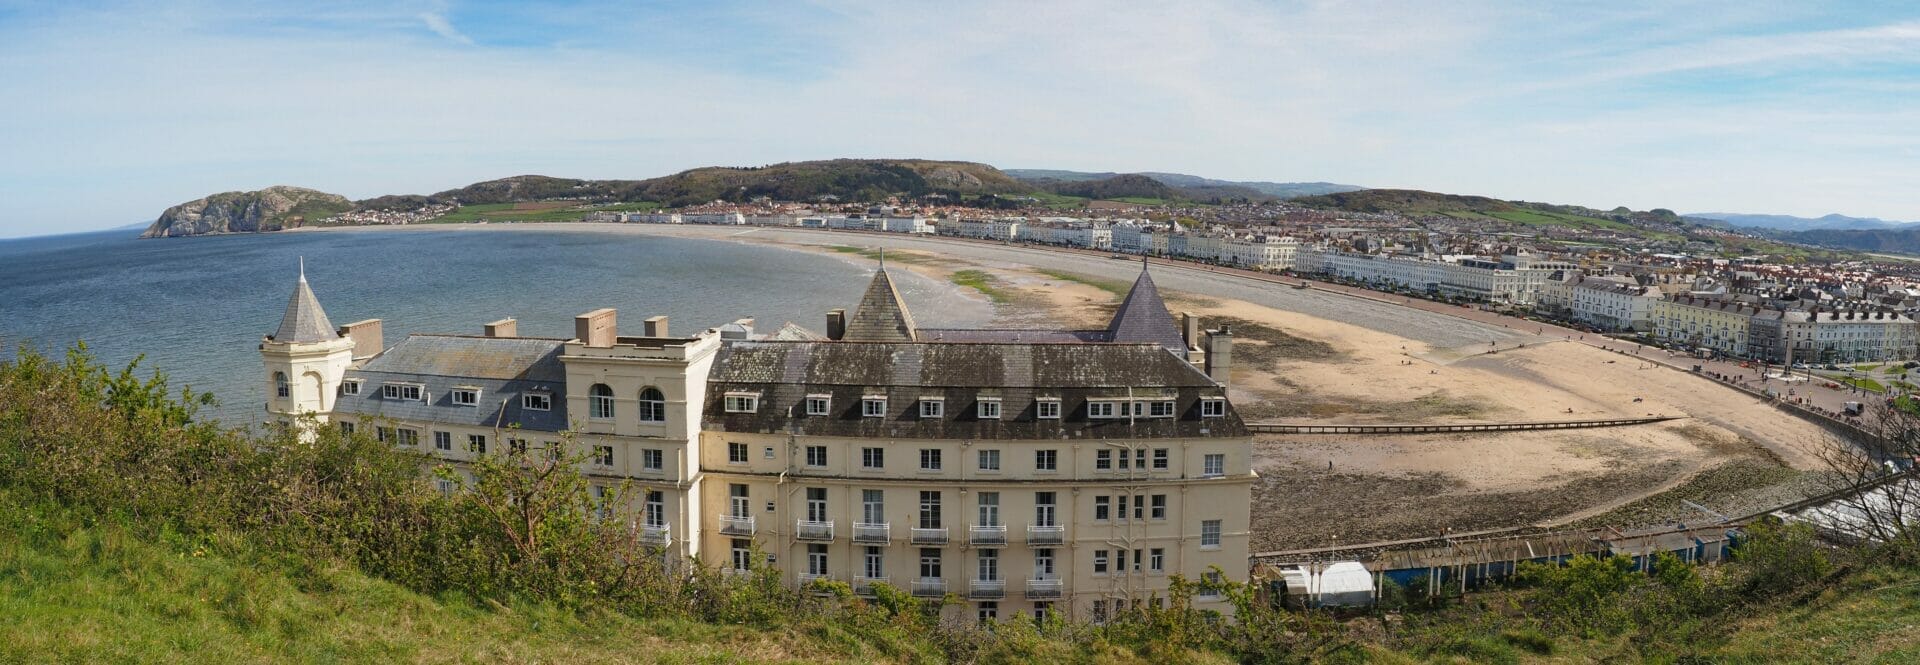 Panorama colour photo of Llandudno Town and Bay from behind the Grand Hotel taken from the Great Orme in North Wales